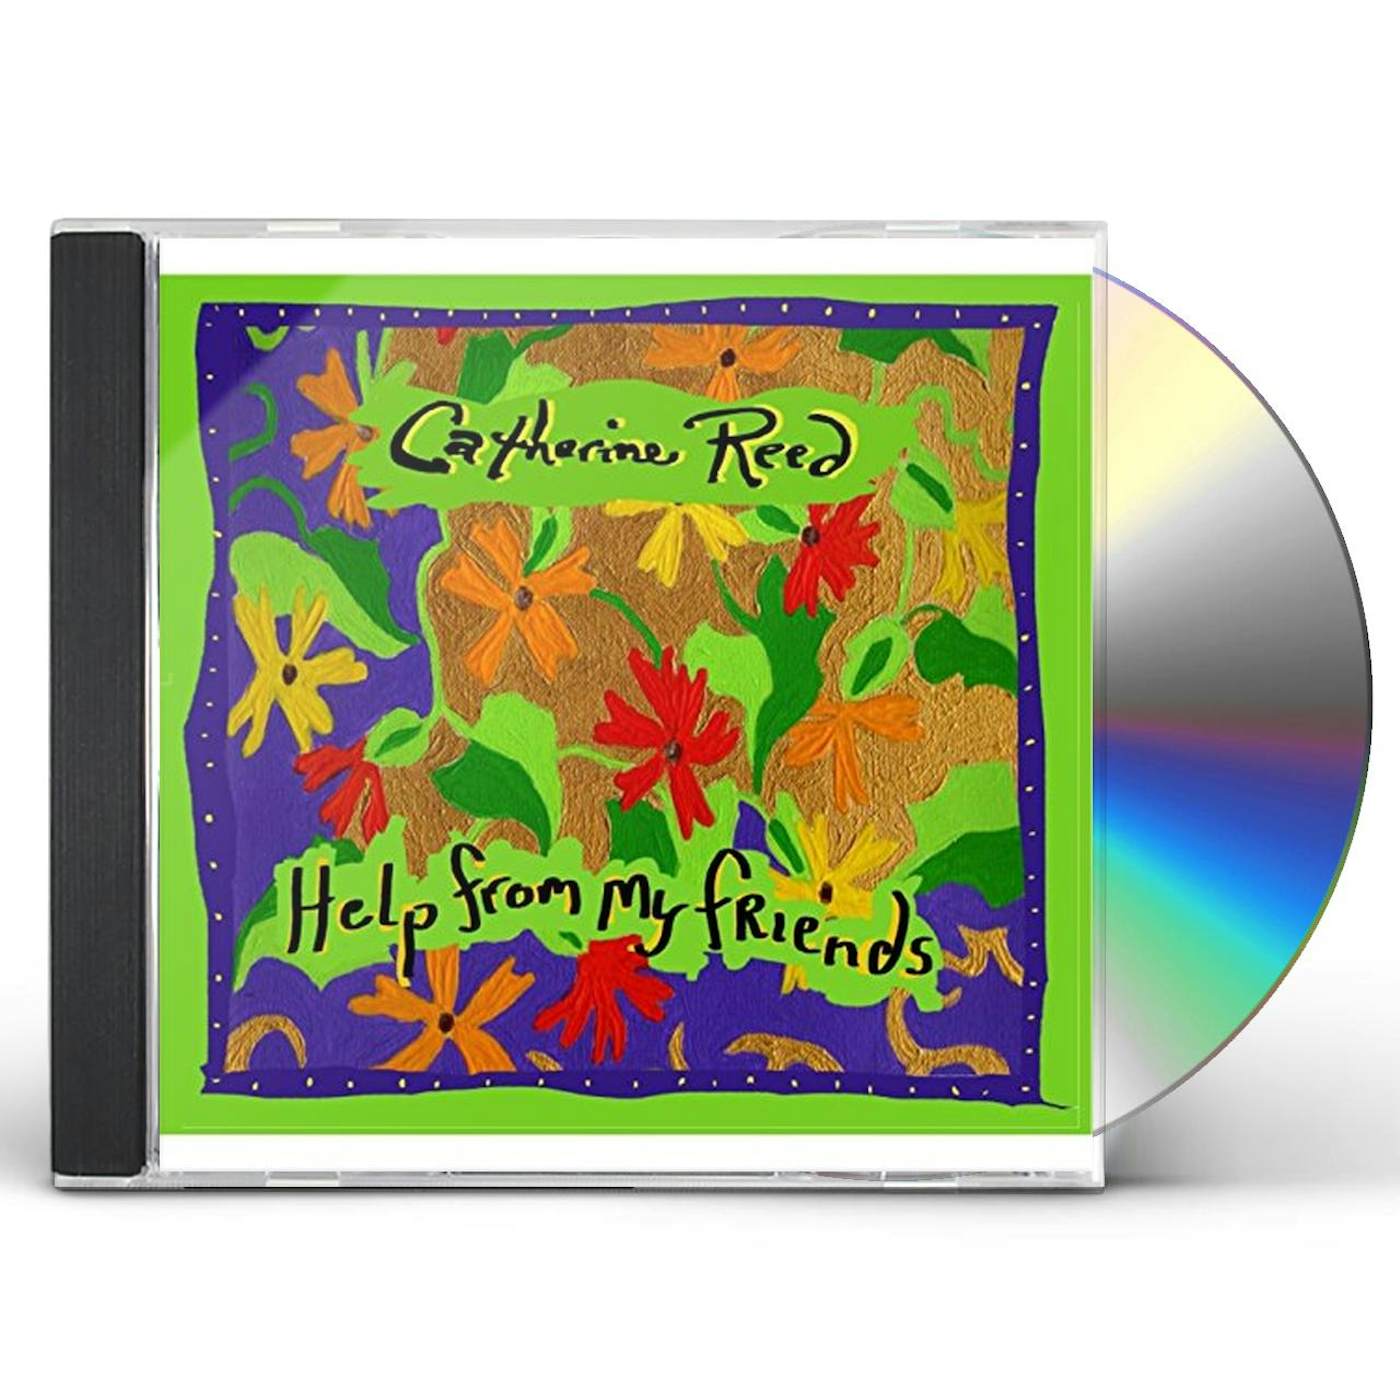 Catherine Reed HELP FROM MY FRIENDS CD